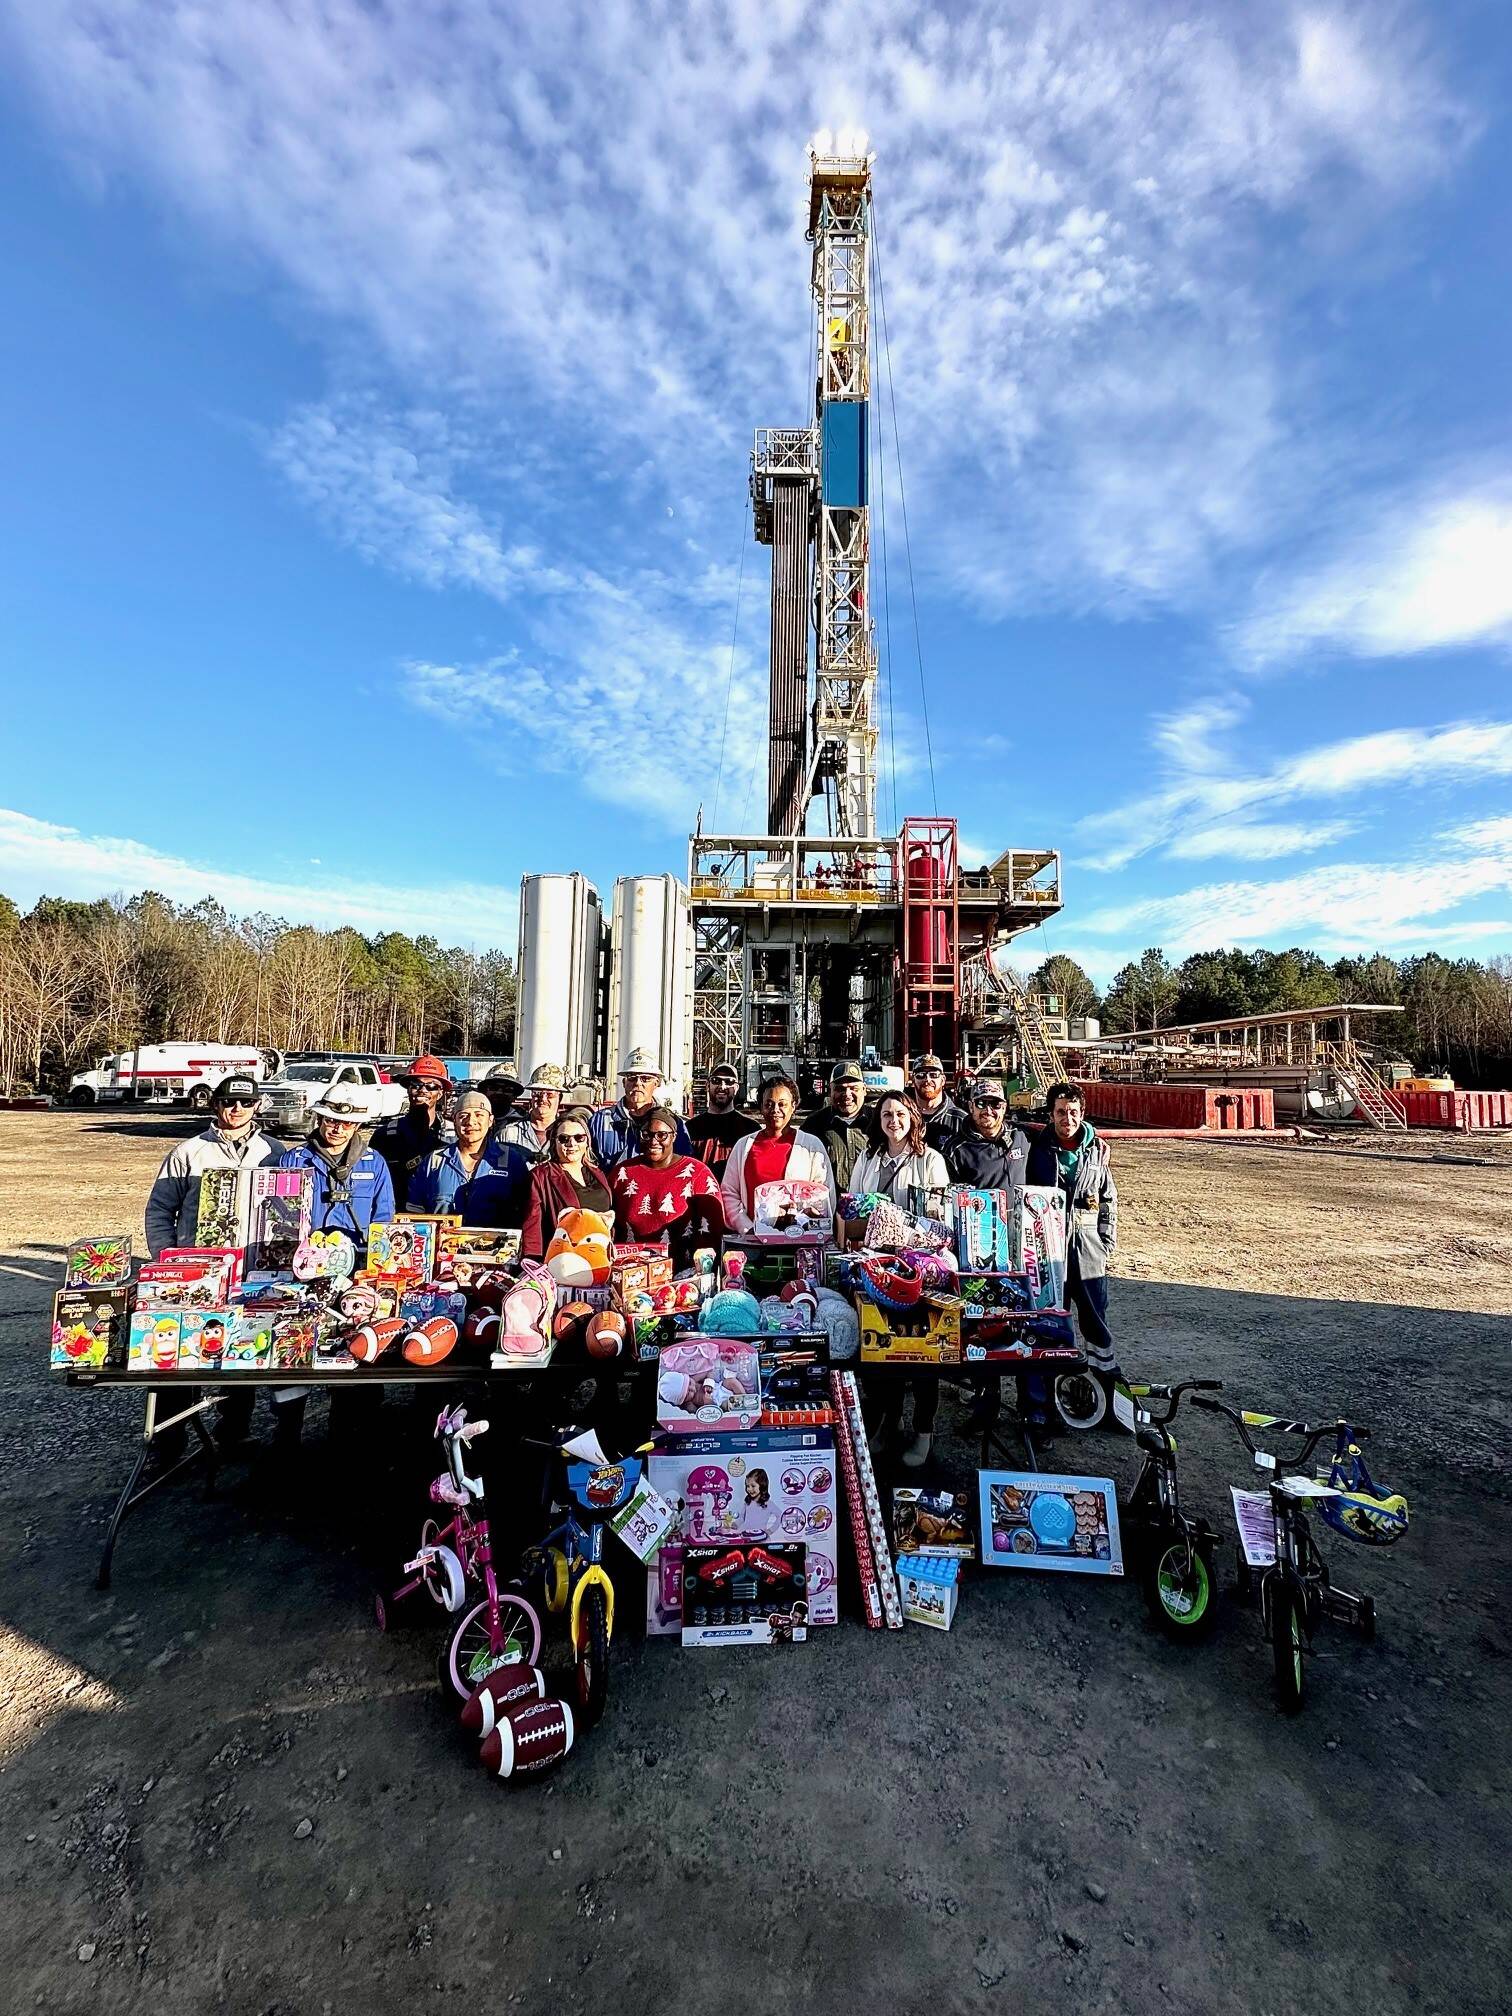 A holiday toy drive organized by our lithium wells team collected more than 150 toys and gift cards for children in the Magnolia, Arkansas, area. Pictured are the wells operation supervisor team and crew, along with representatives from the Magnolia Housing Authority and the Magnolia Chamber of Commerce.